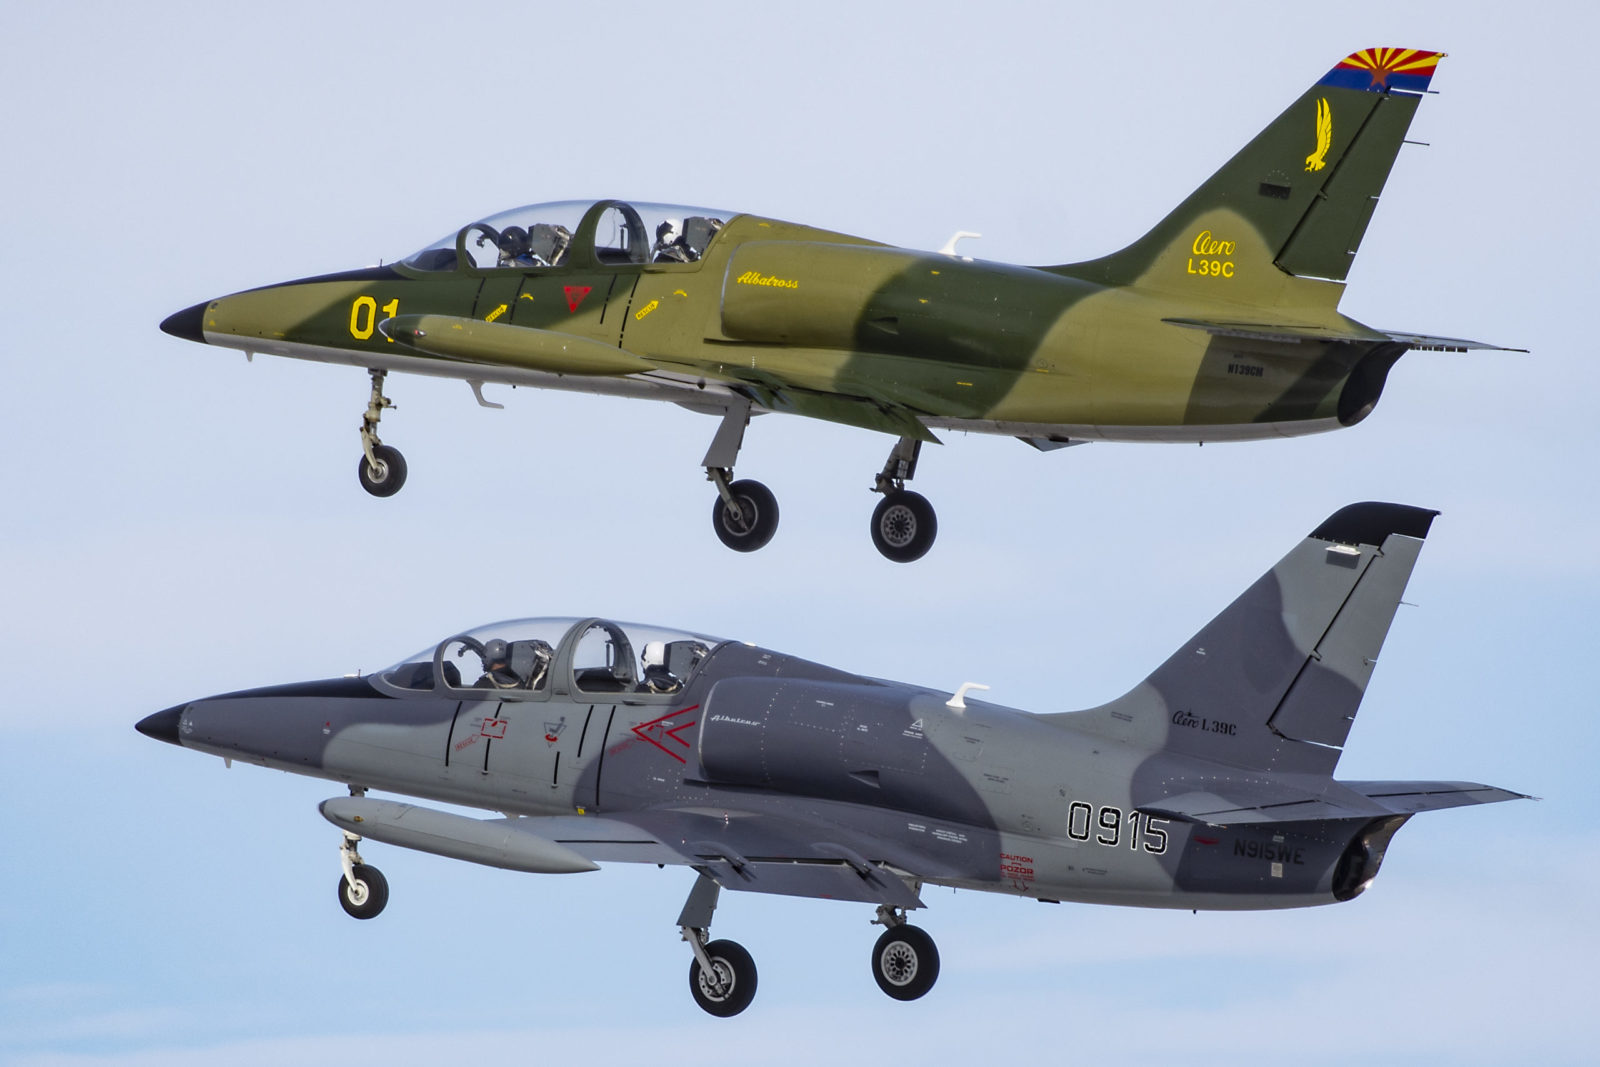 Photo of two L-39 aircraft in the sky with landing gear down.